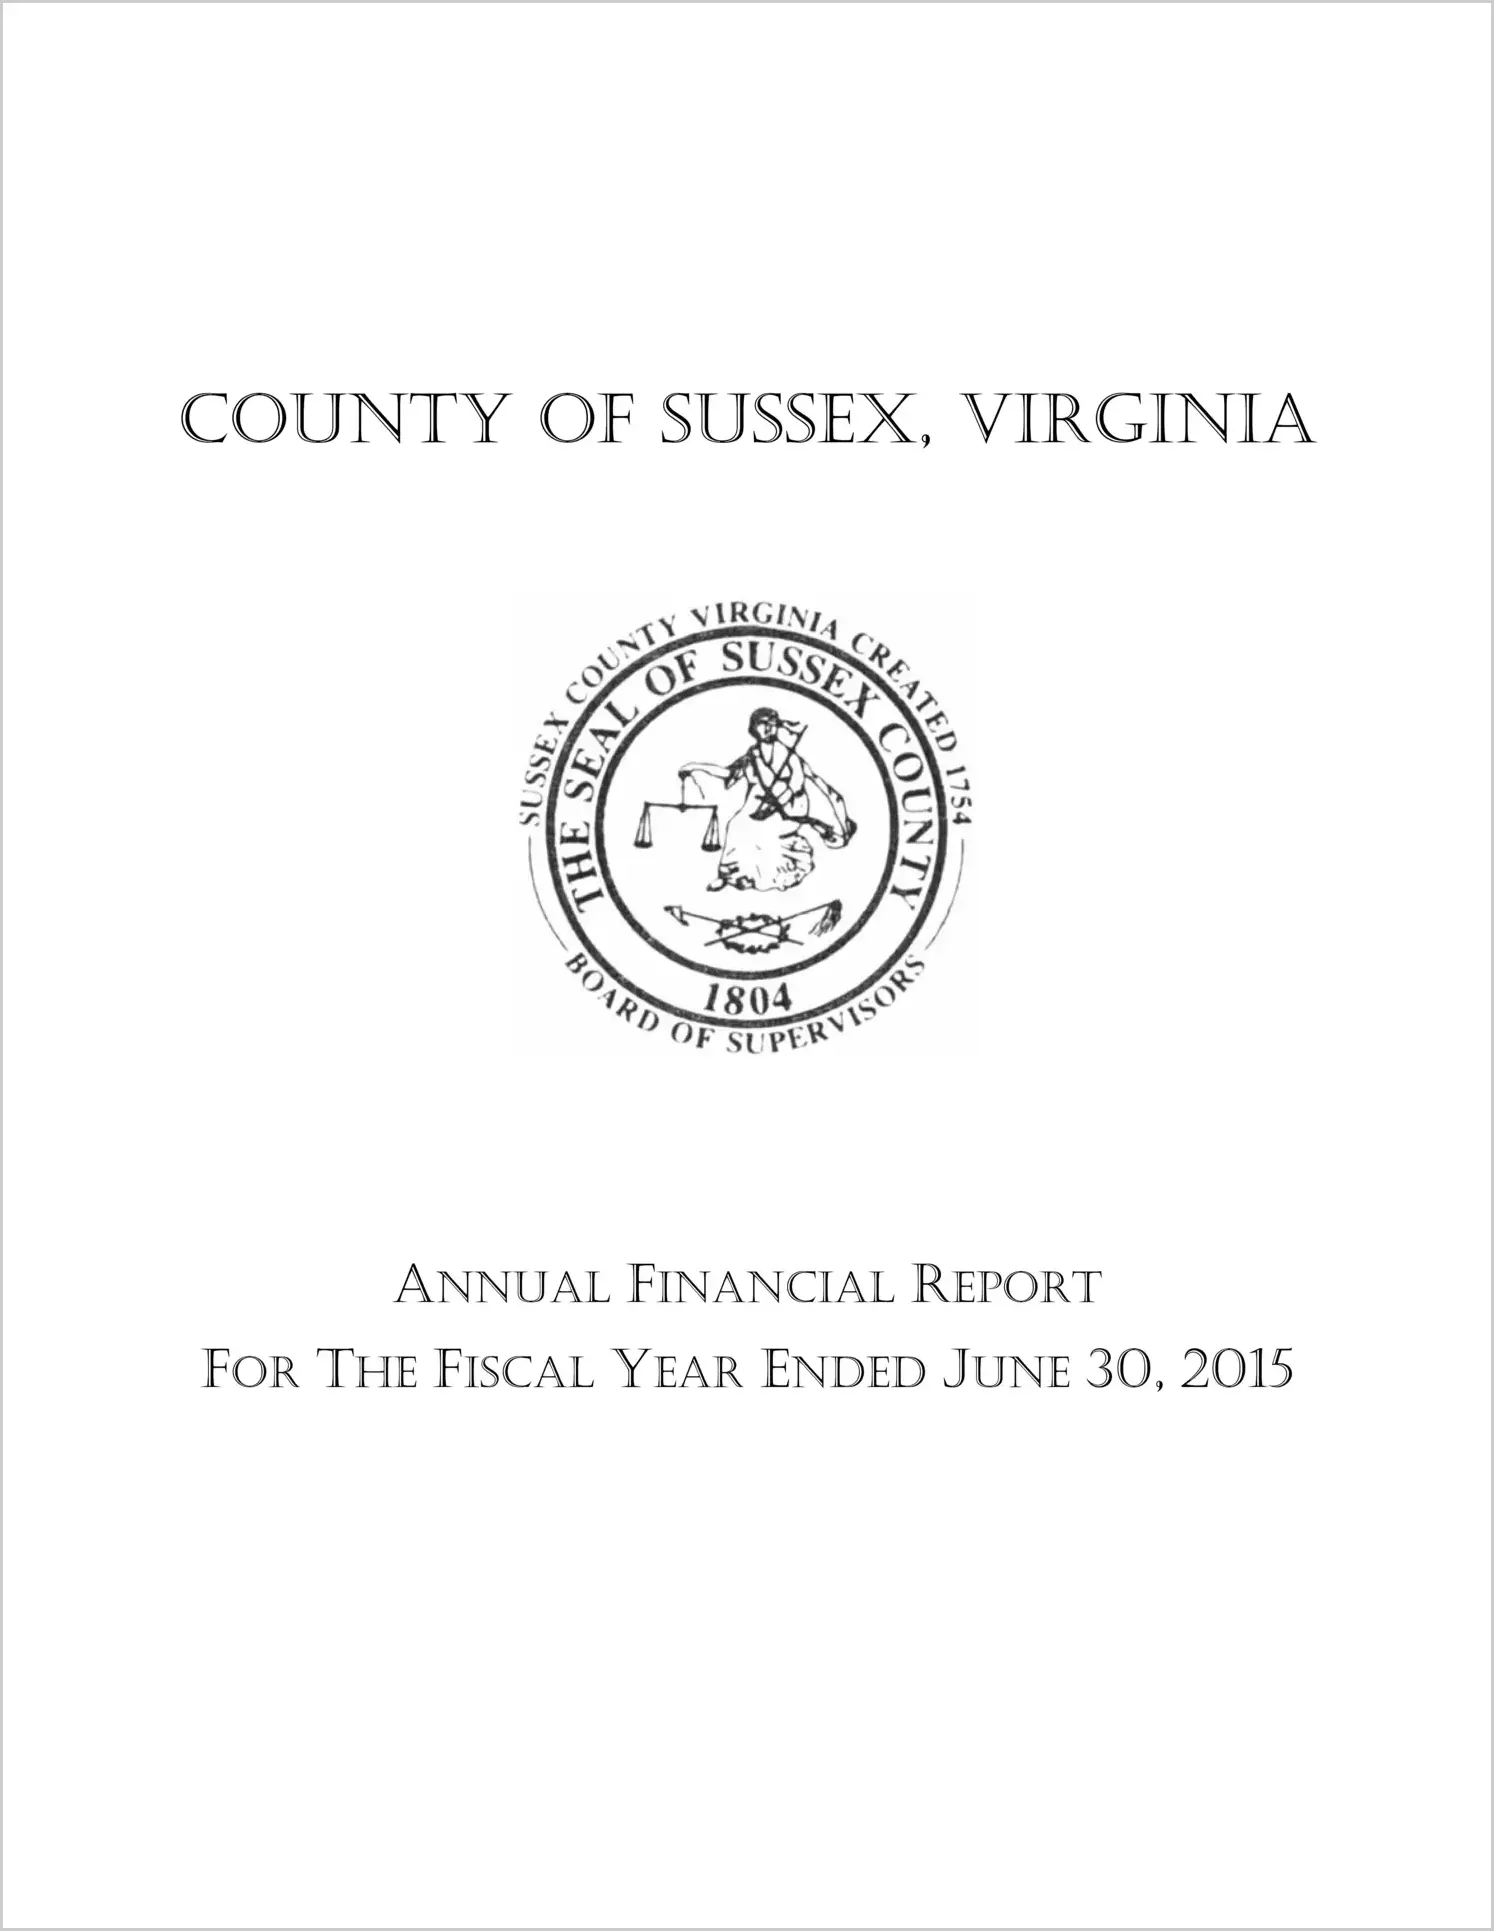 2015 Annual Financial Report for County of Sussex